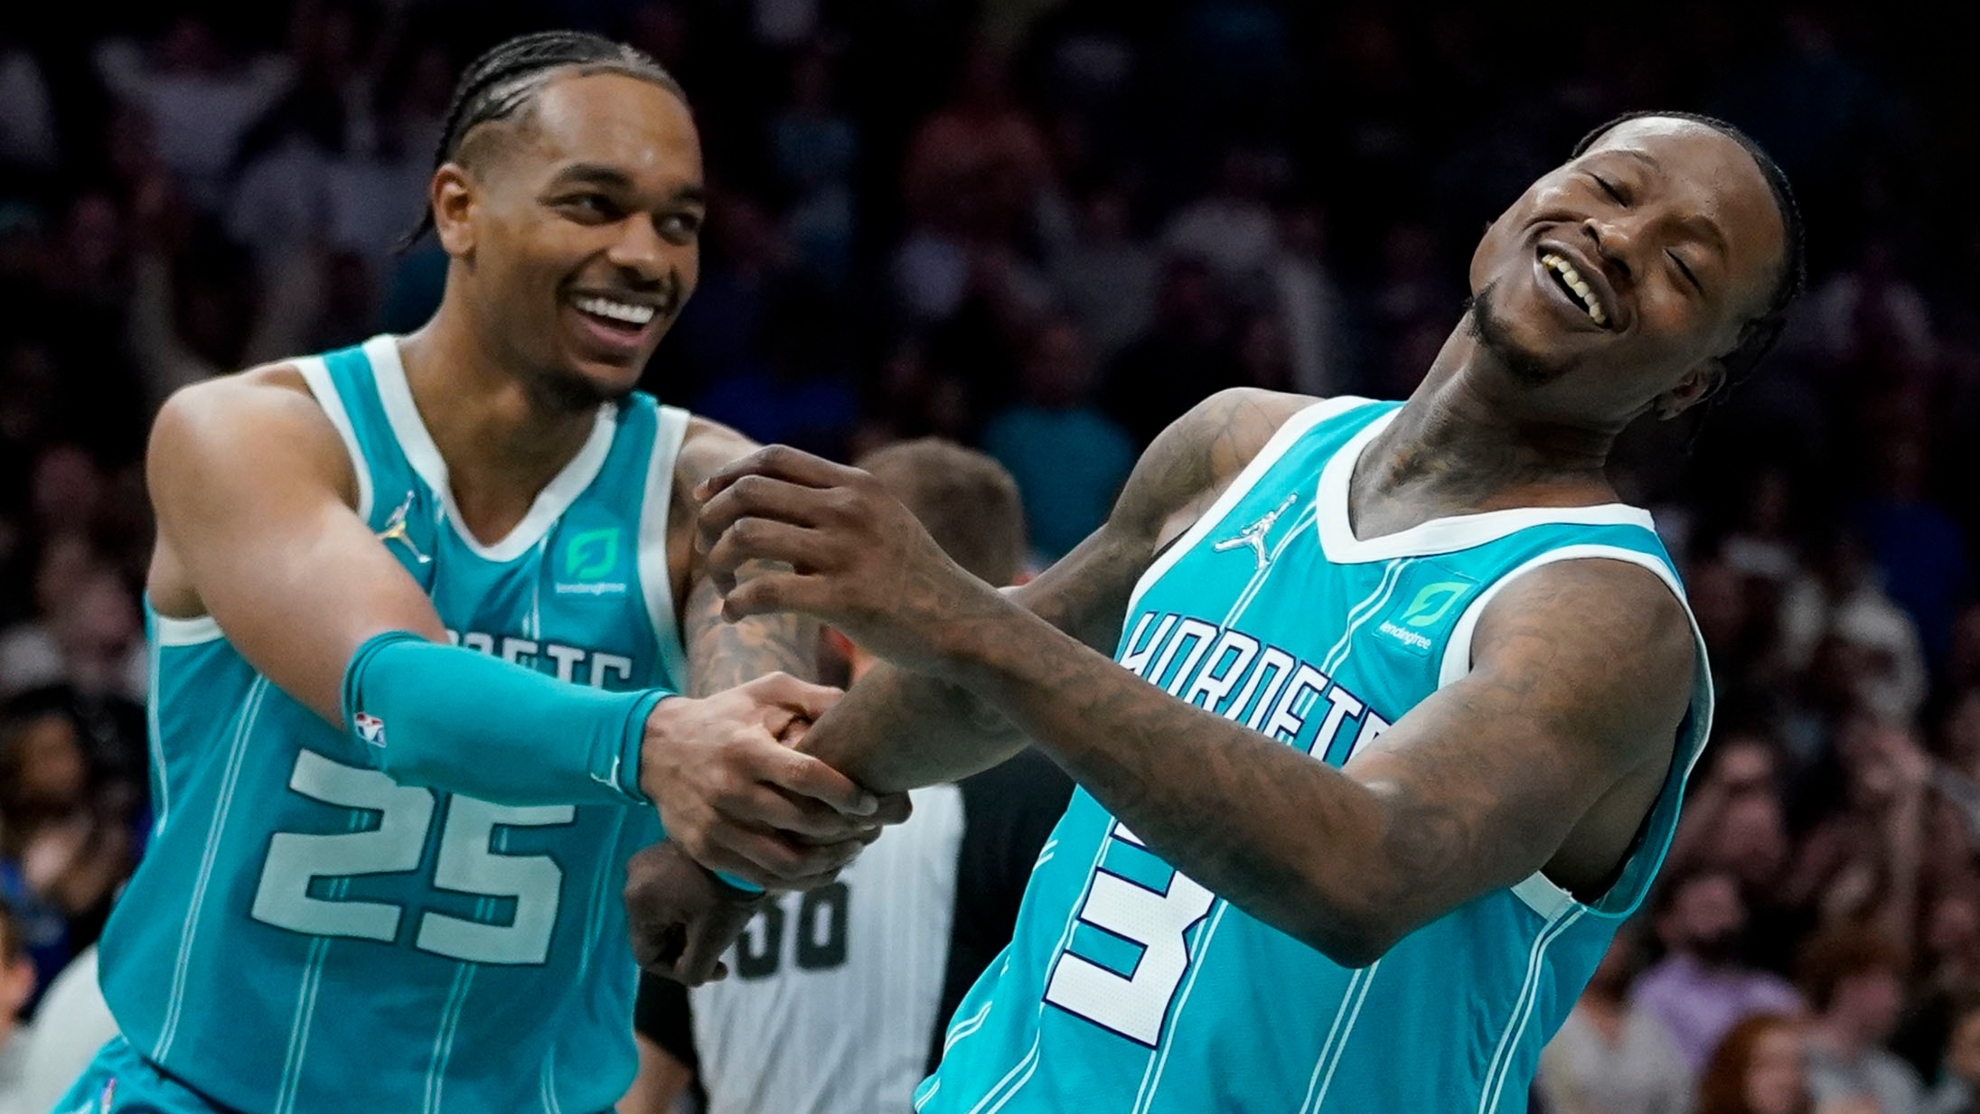 Charlotte Hornets guard Terry Rozier and forward P.J. Washington